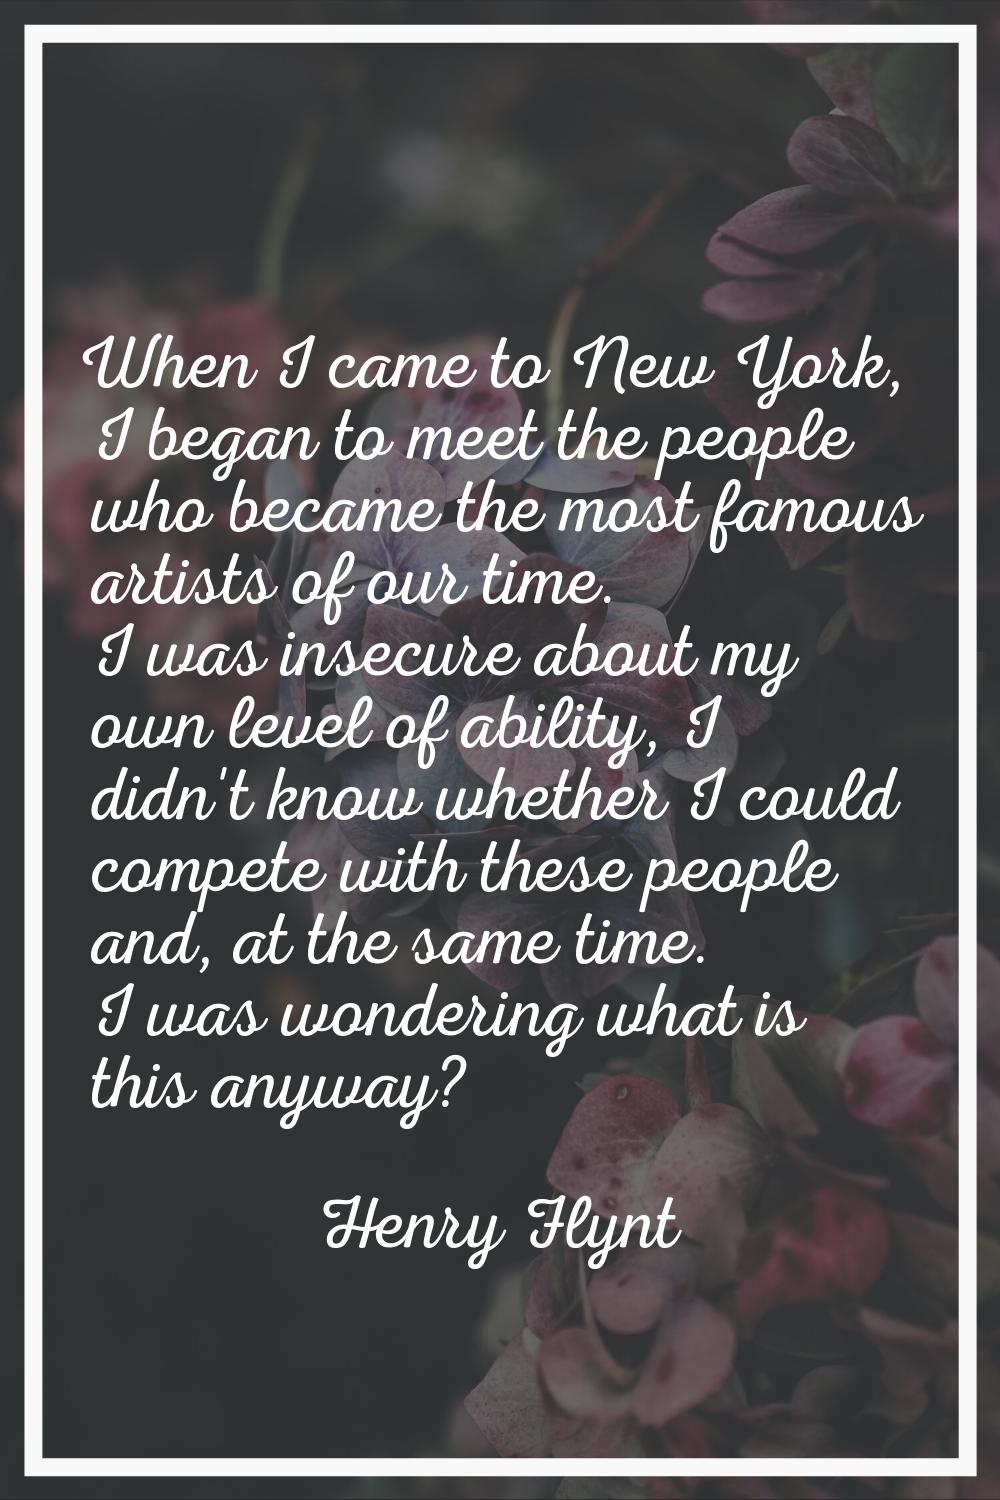 When I came to New York, I began to meet the people who became the most famous artists of our time.